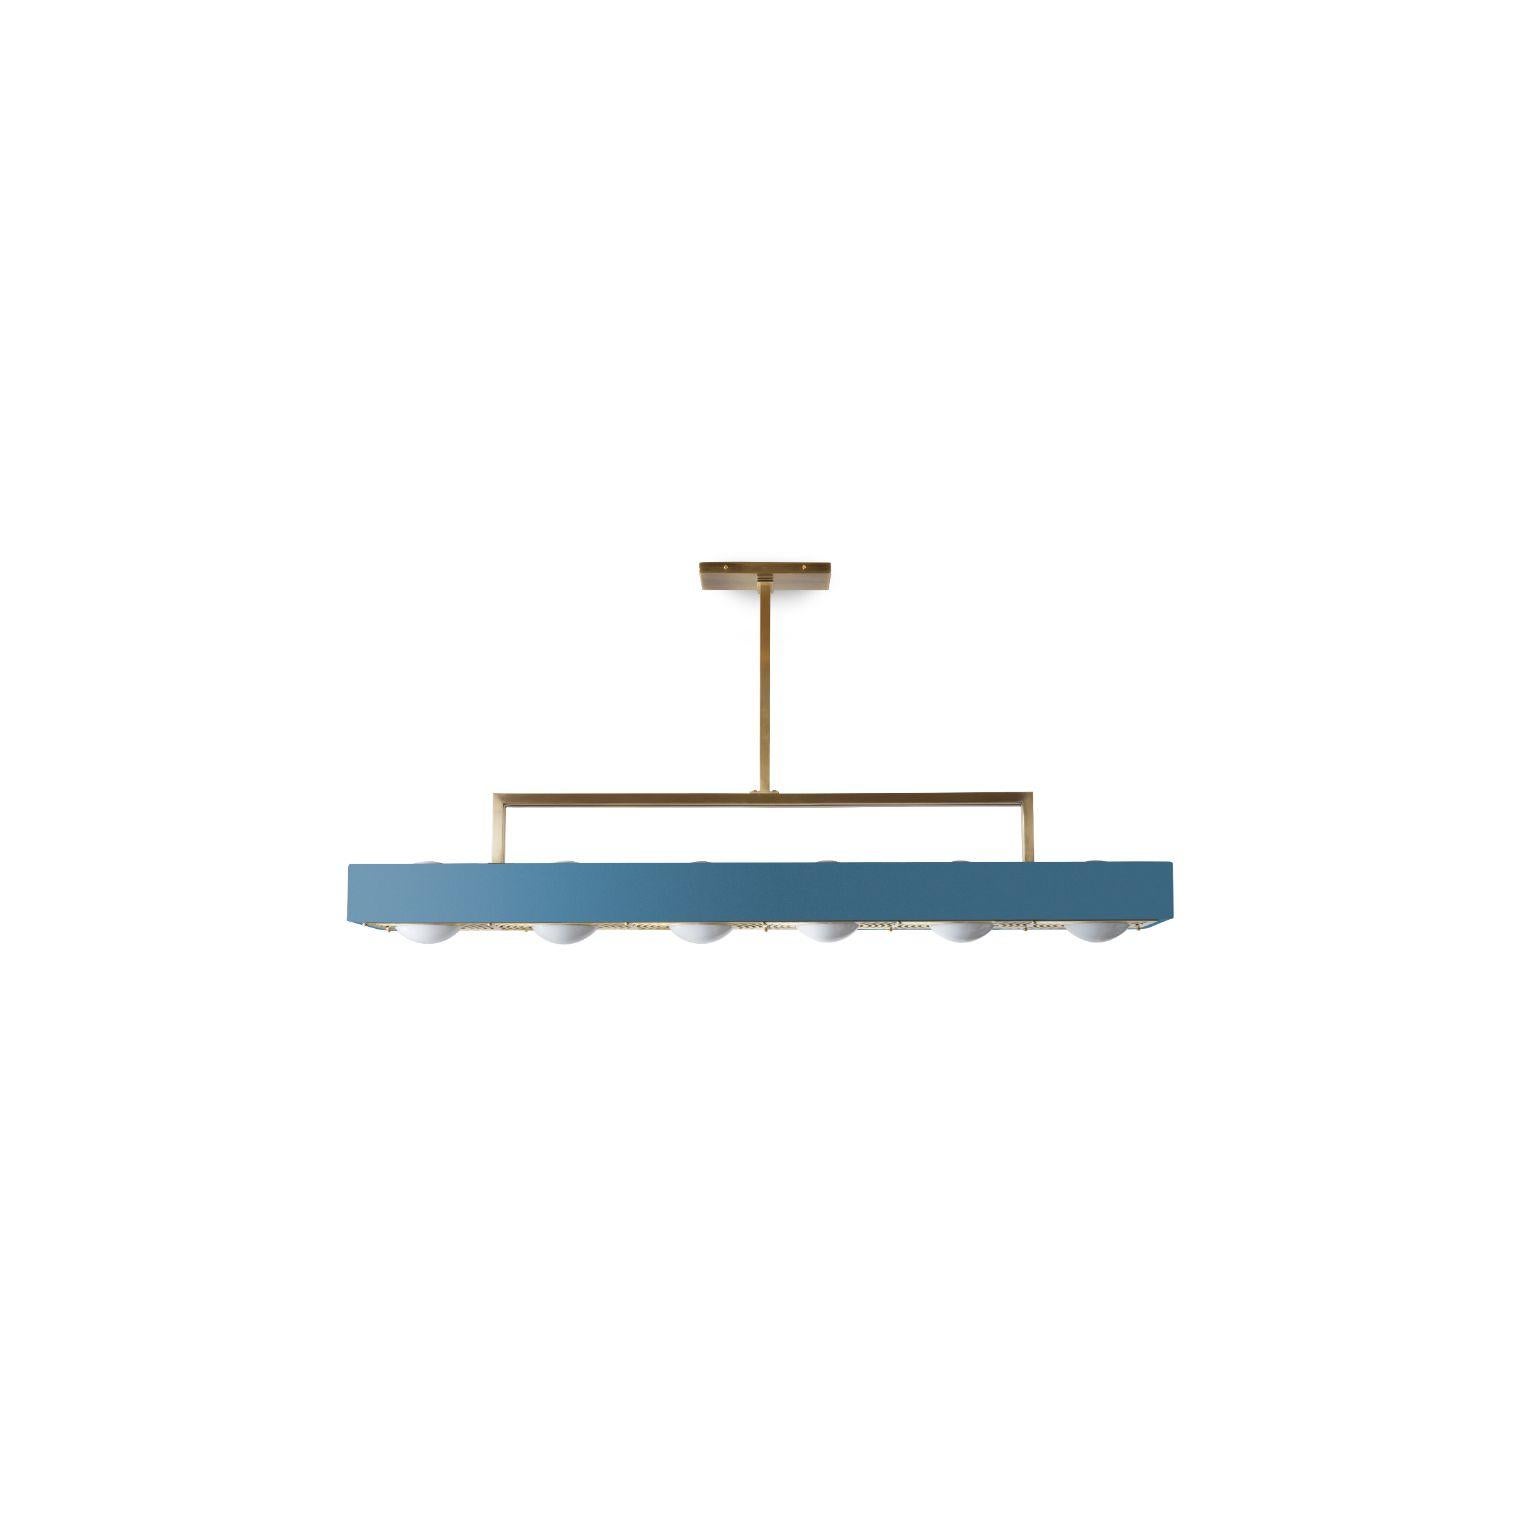 Kernel pendant light XL - Blue by Bert Frank
Dimensions: 22.6 (only lamp) x 119 x 20 cm
Materials: Brass, steel

Also available: in white and black.

When Adam Yeats and Robbie Llewellyn founded Bert Frank in 2013 it was a meeting of minds and the